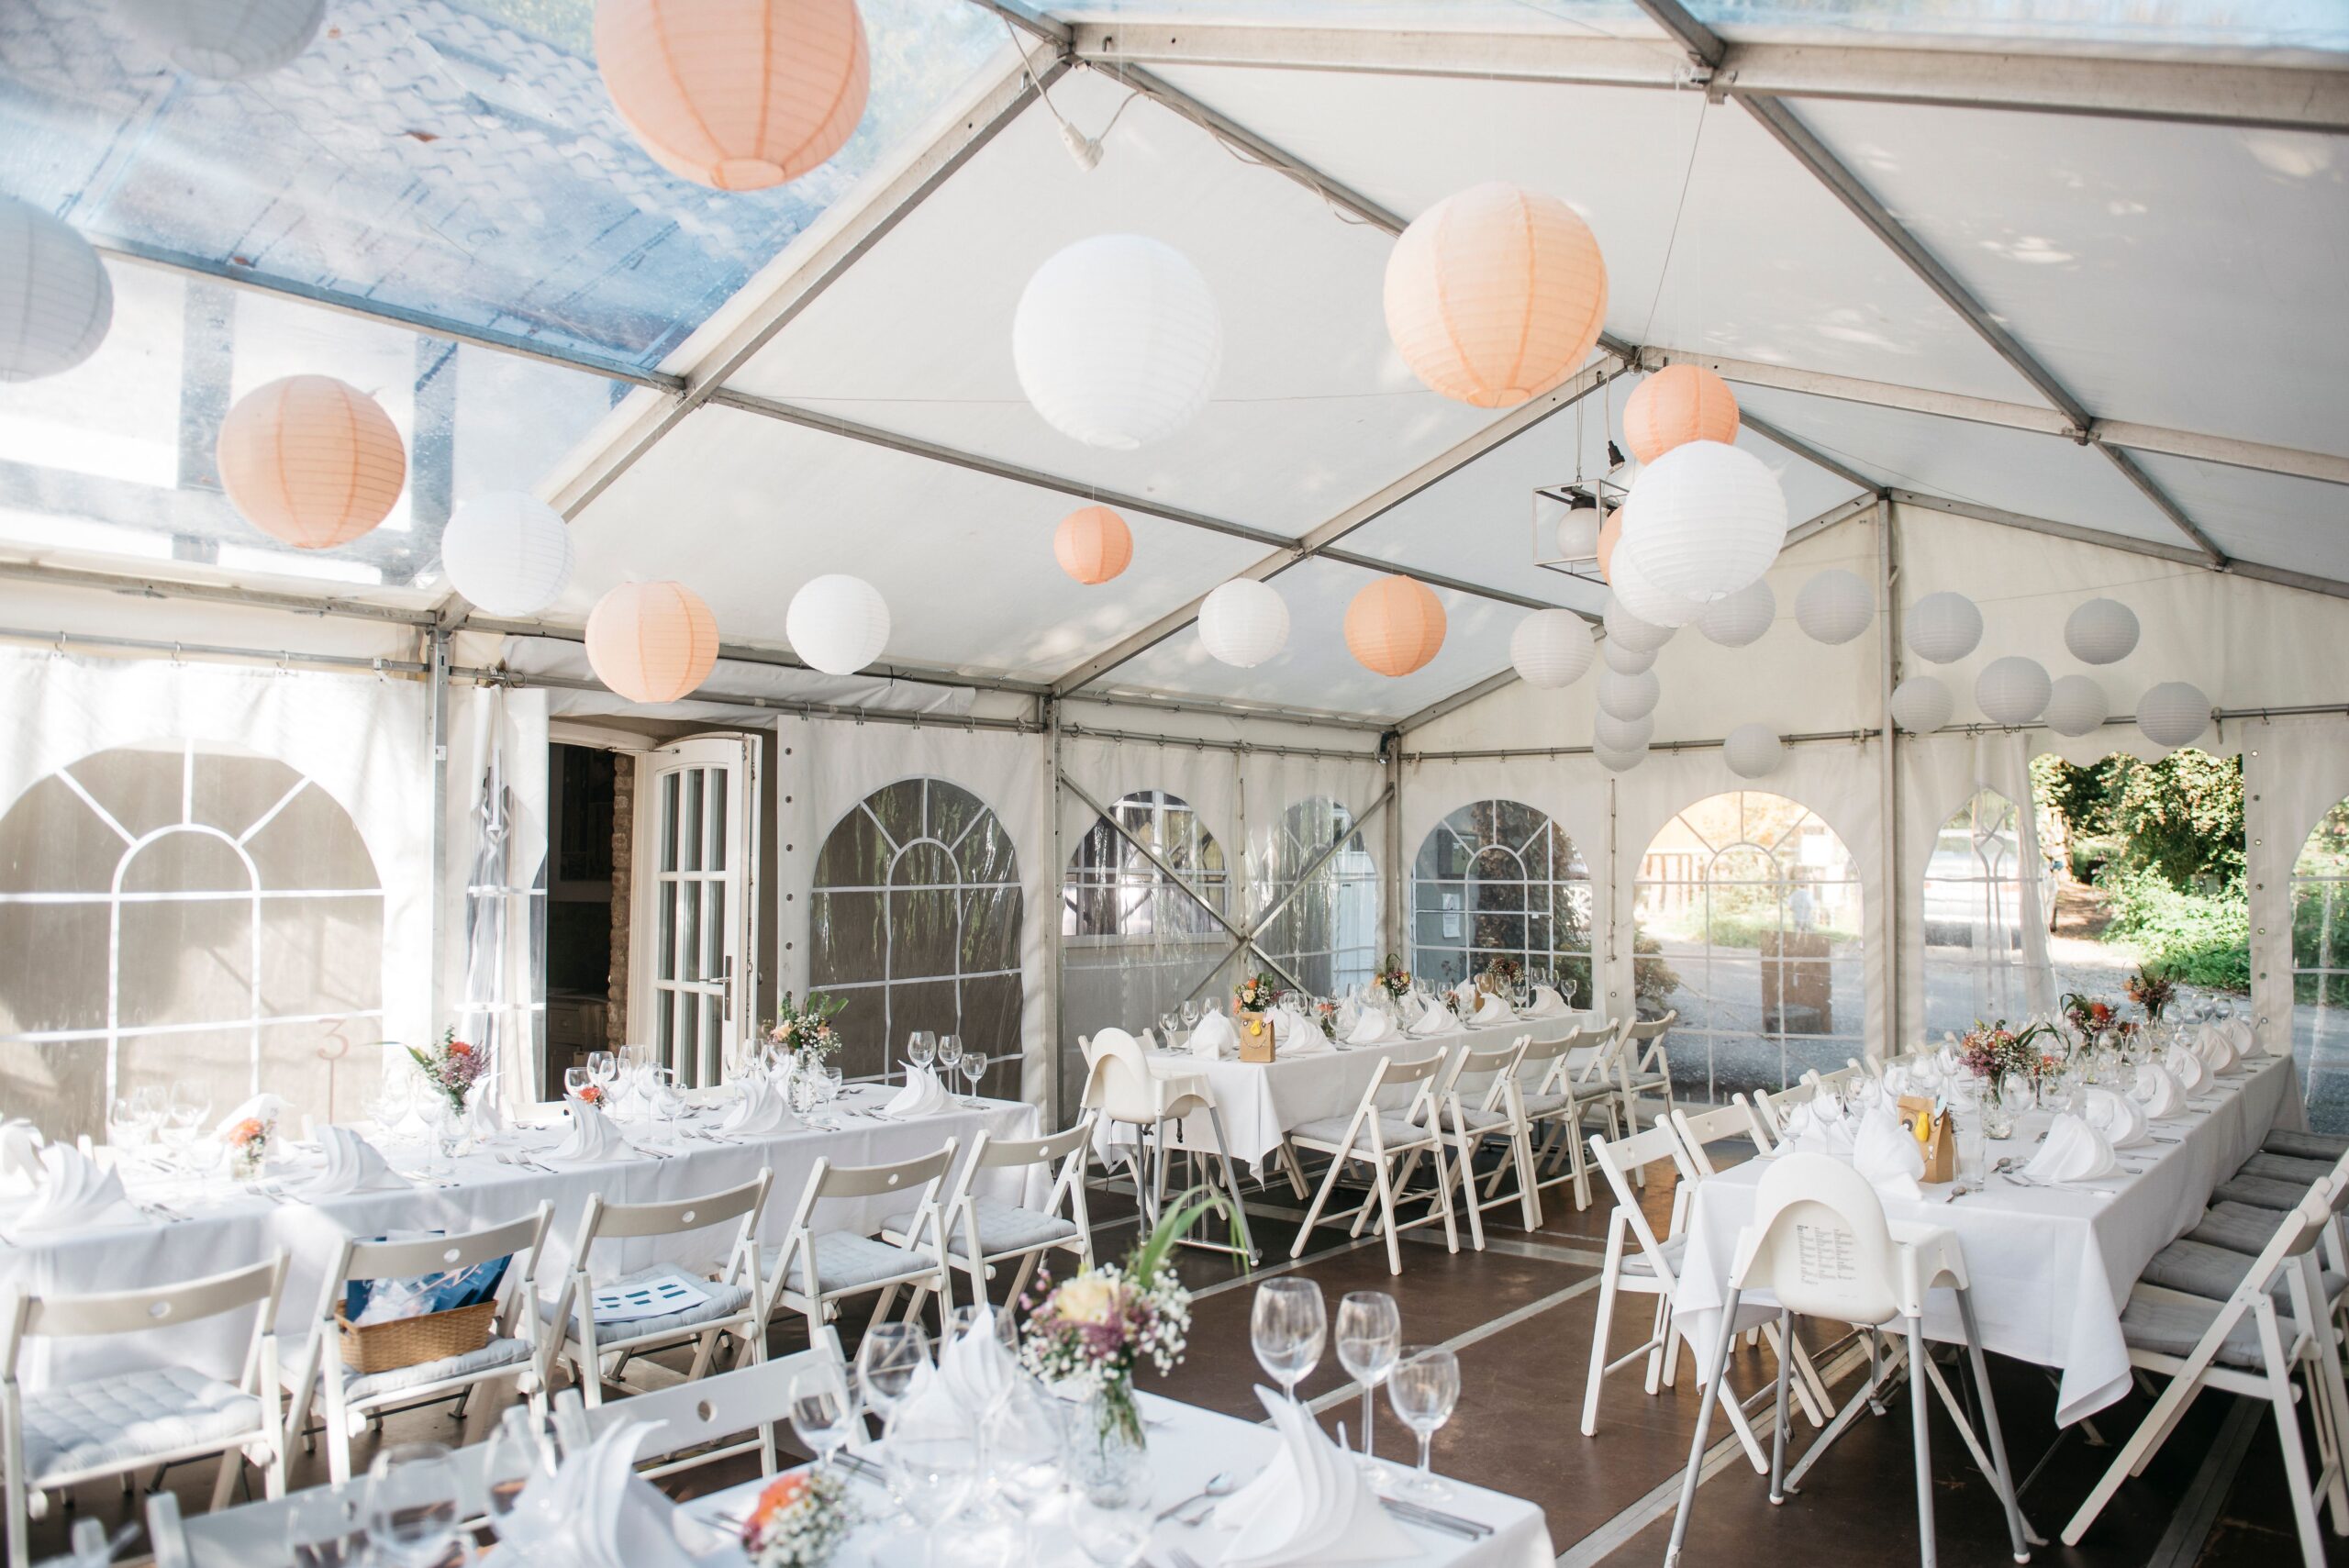 An event setup under large paper lanterns in a tent